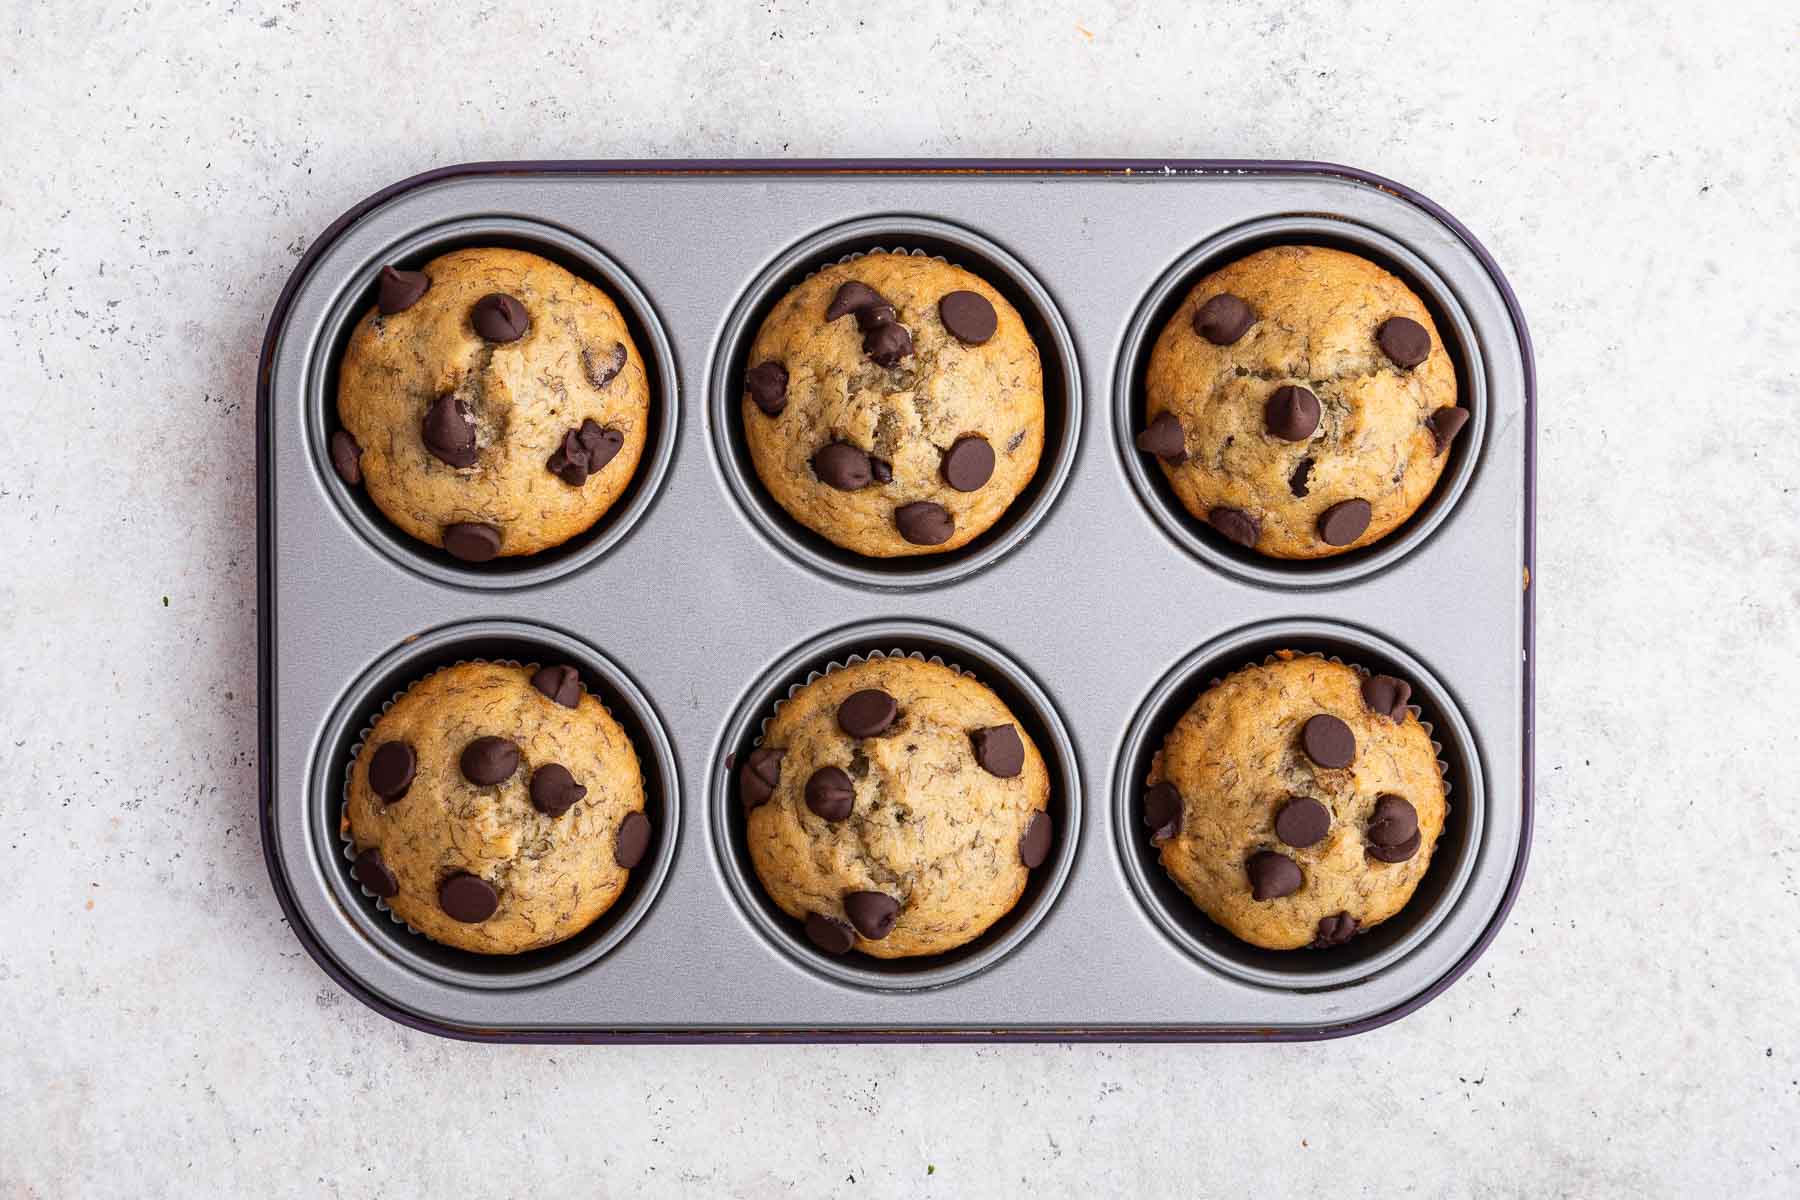 Six freshly baked banana chocolate chip muffins in pan.